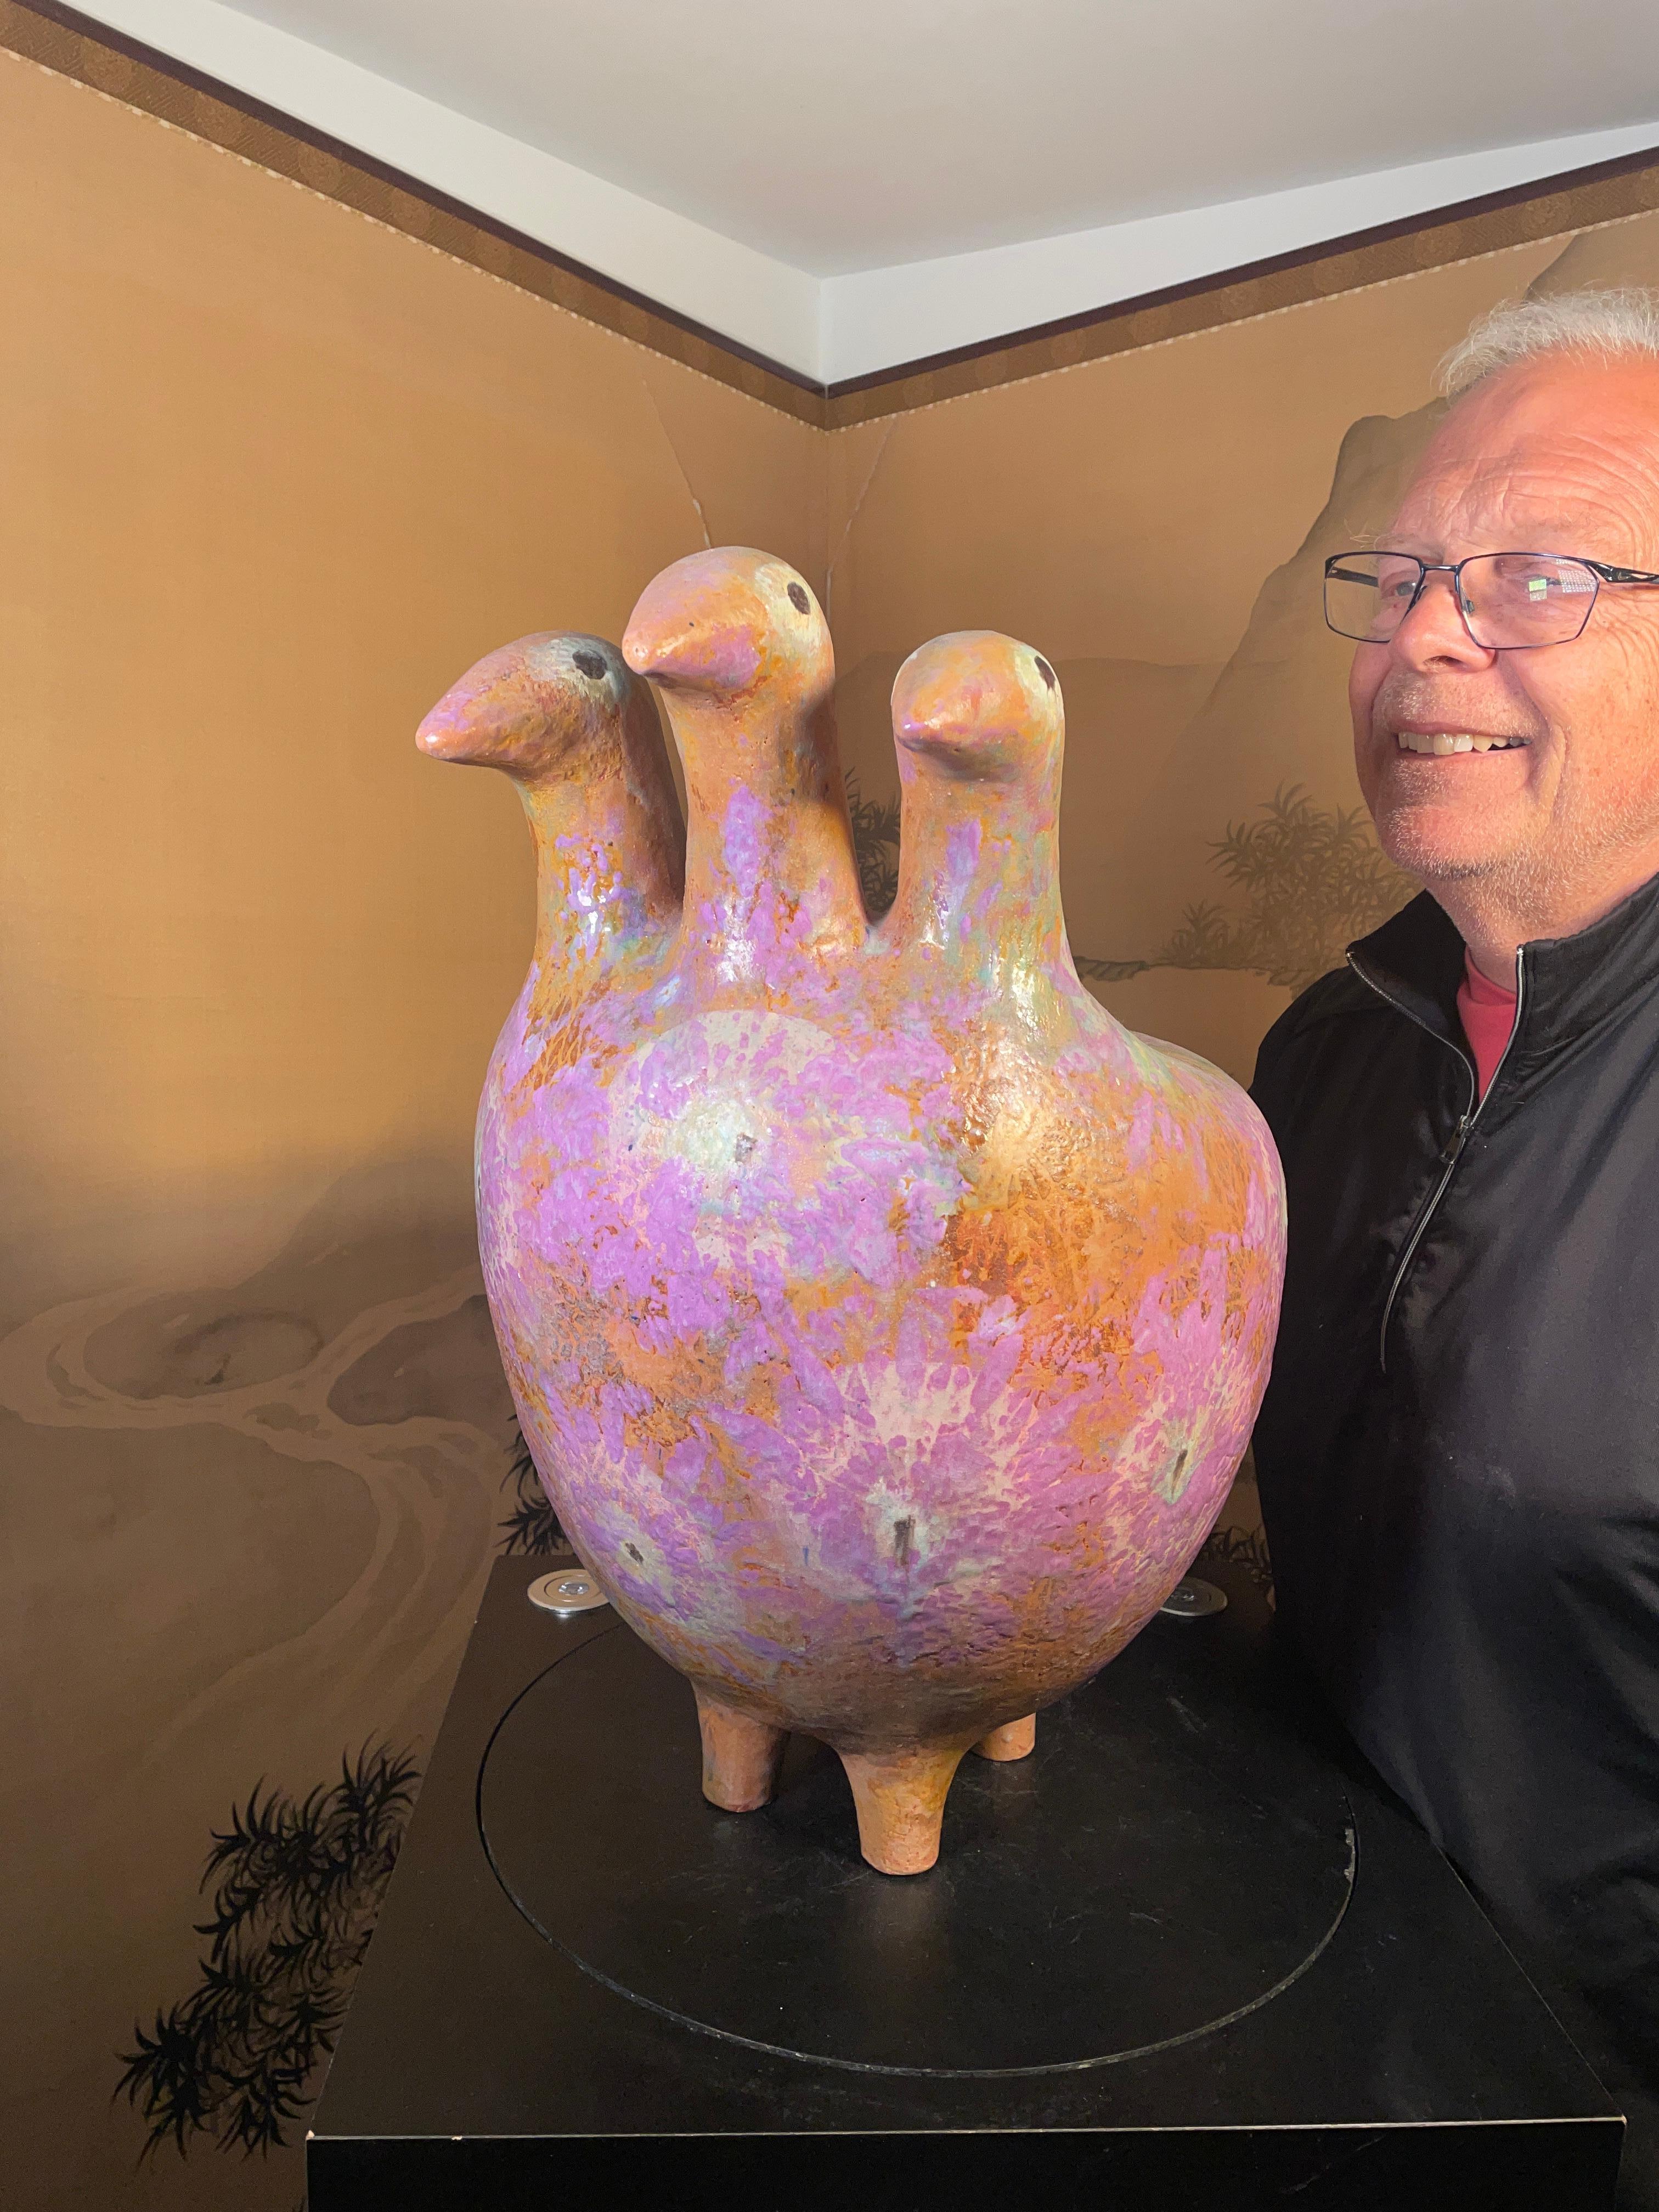 A one-of-a-kind monumental Whimsical Goose 